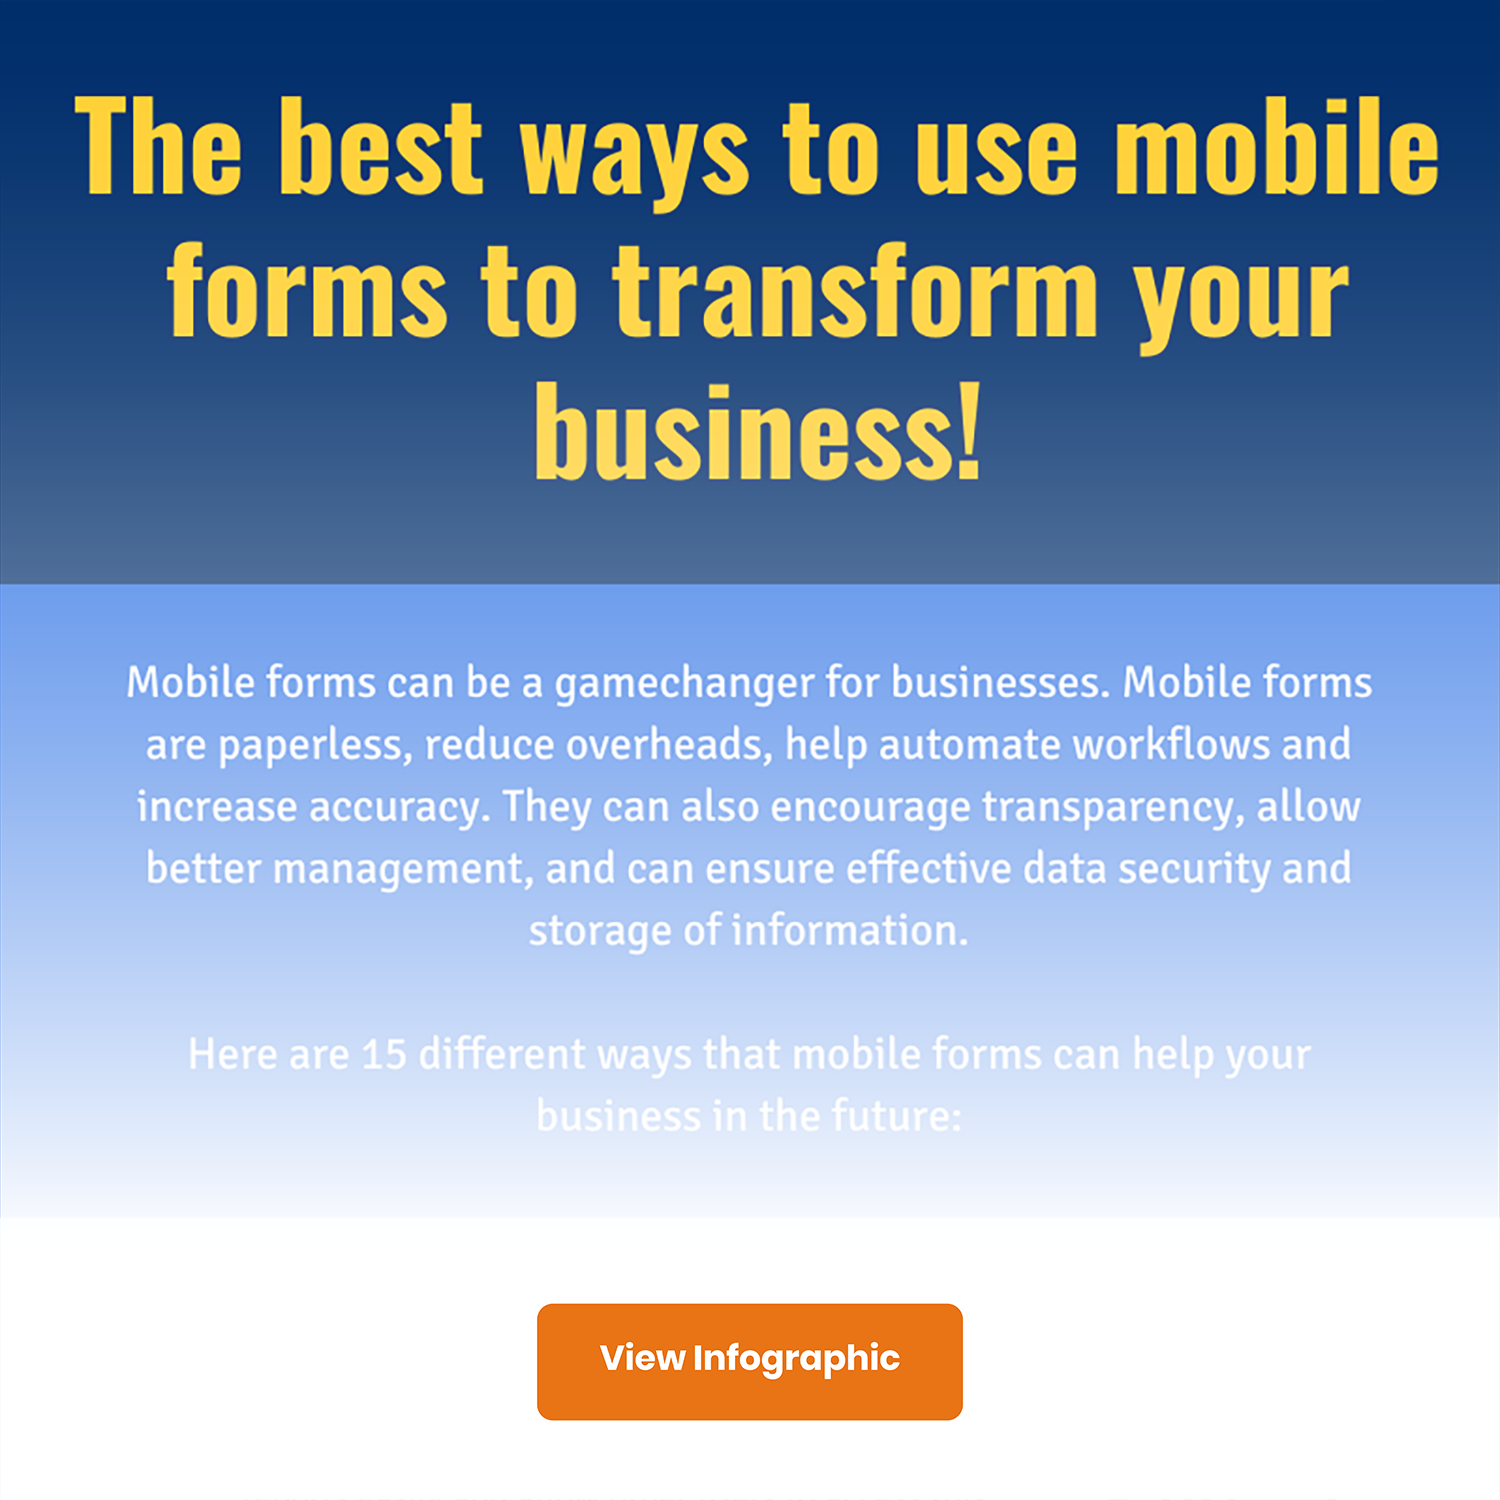 The best ways to use mobile forms to transform your business-Infographic